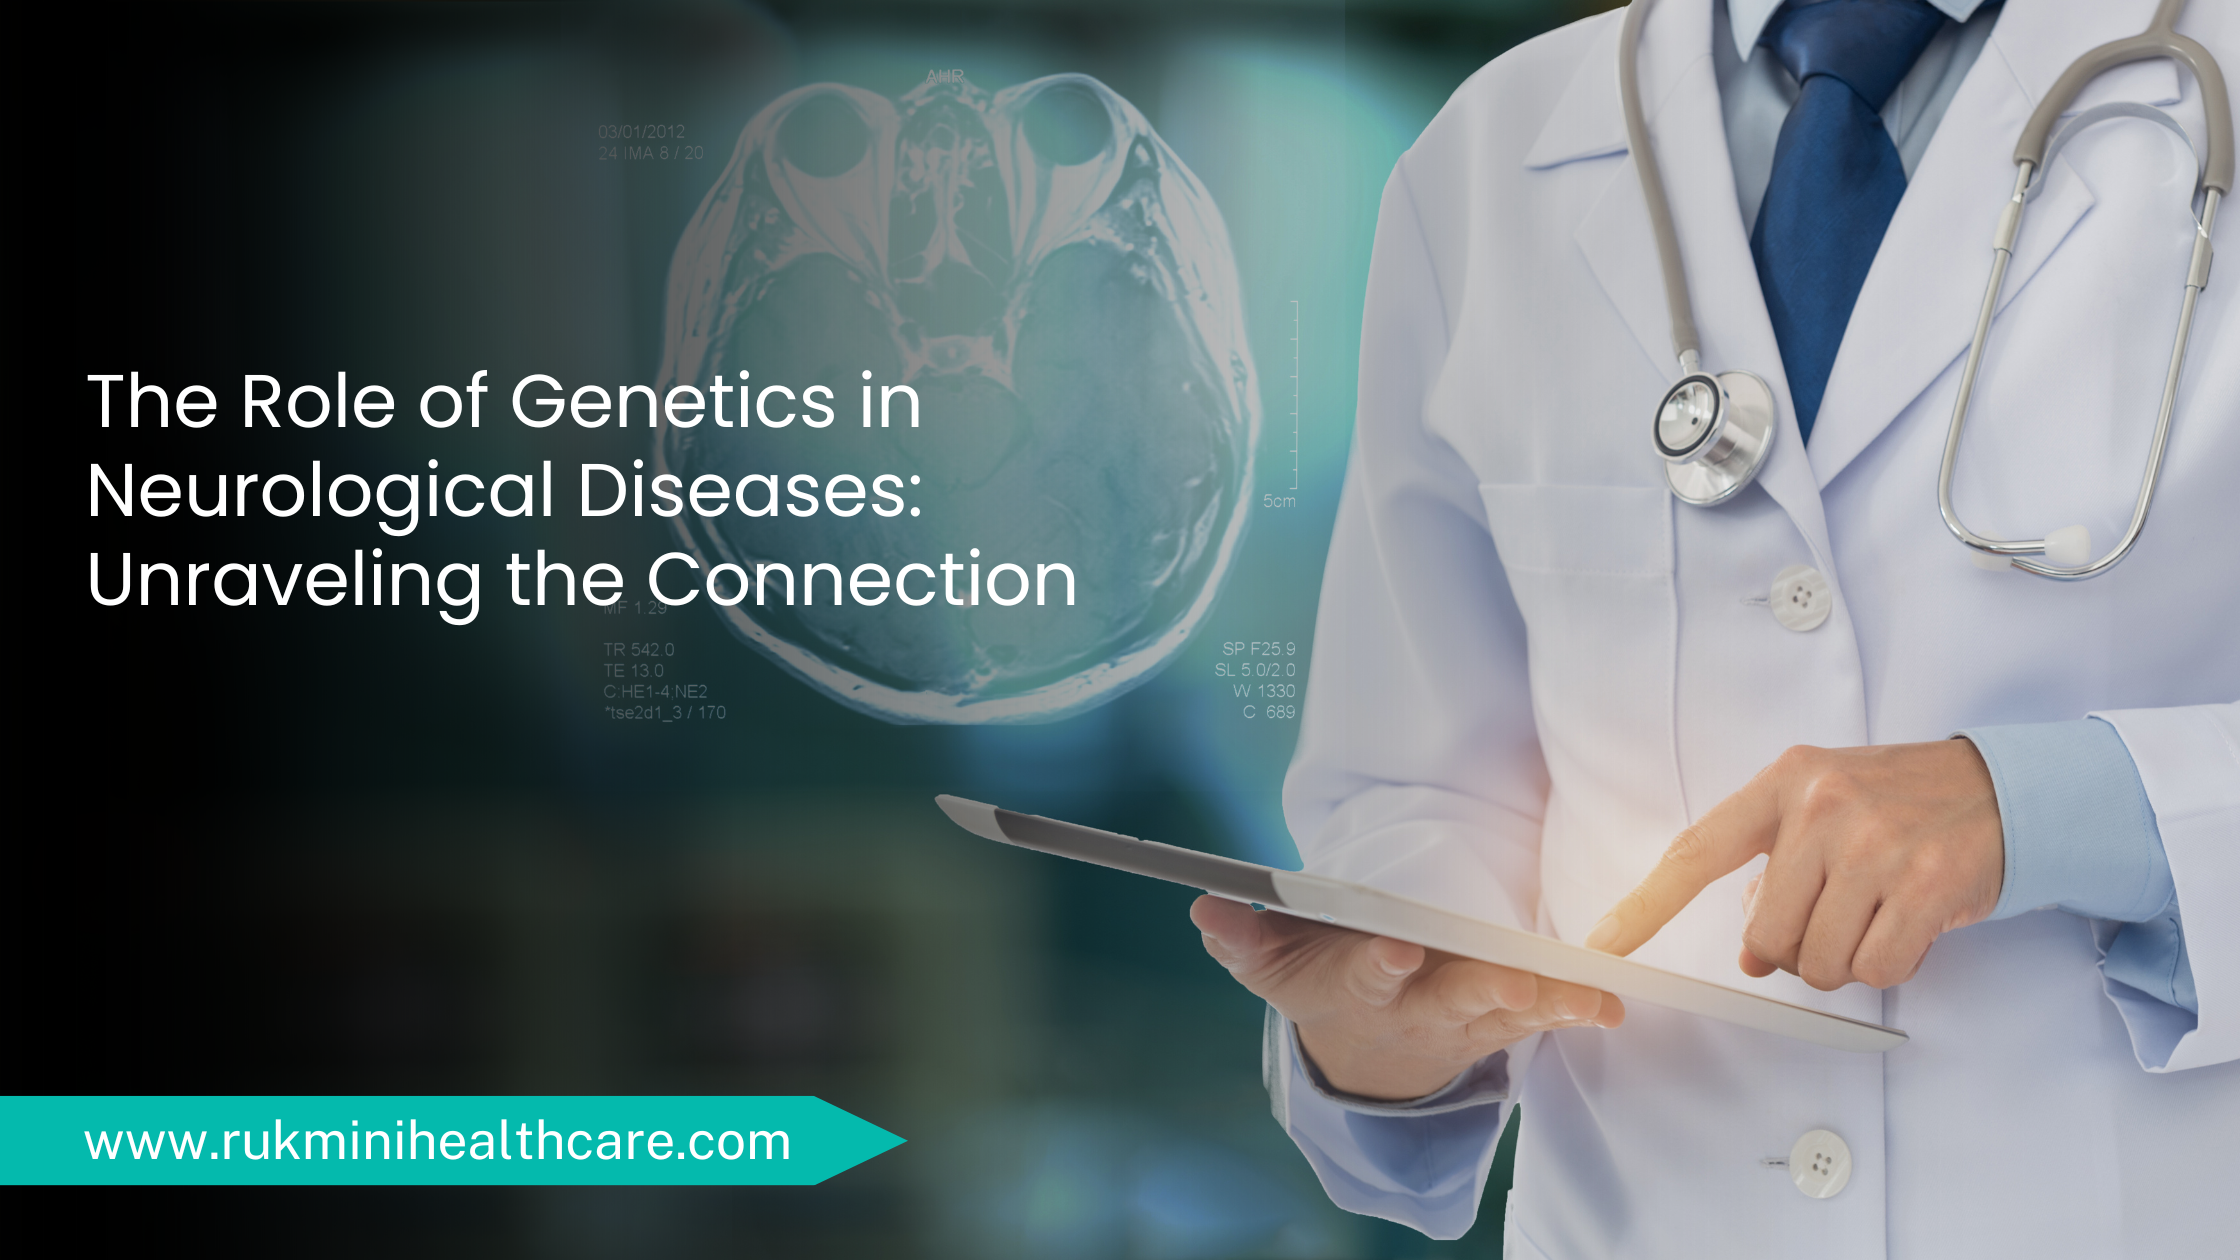 The Role of Genetics in Neurological Diseases: Unraveling the Connection